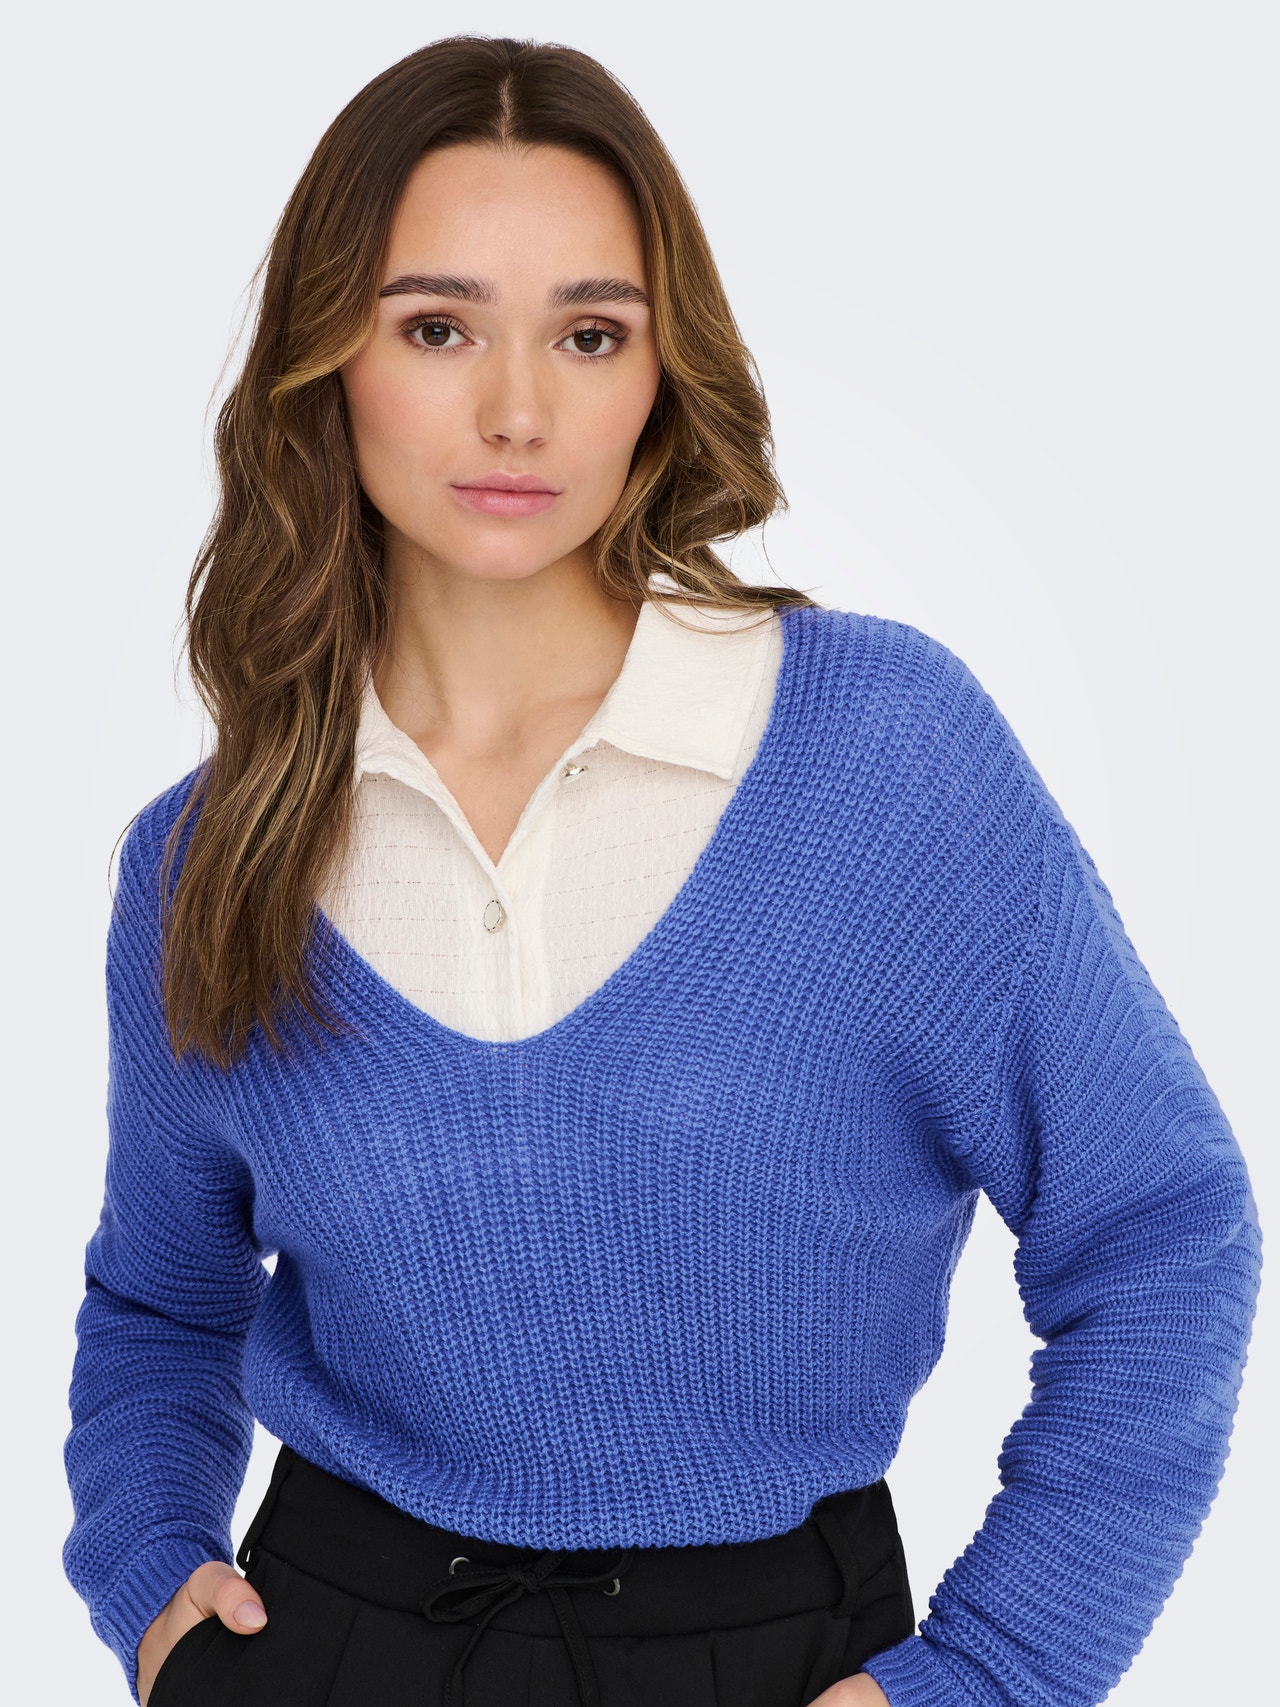 ONLY Reversible Knit Pullover -Dazzling Blue - 15287436